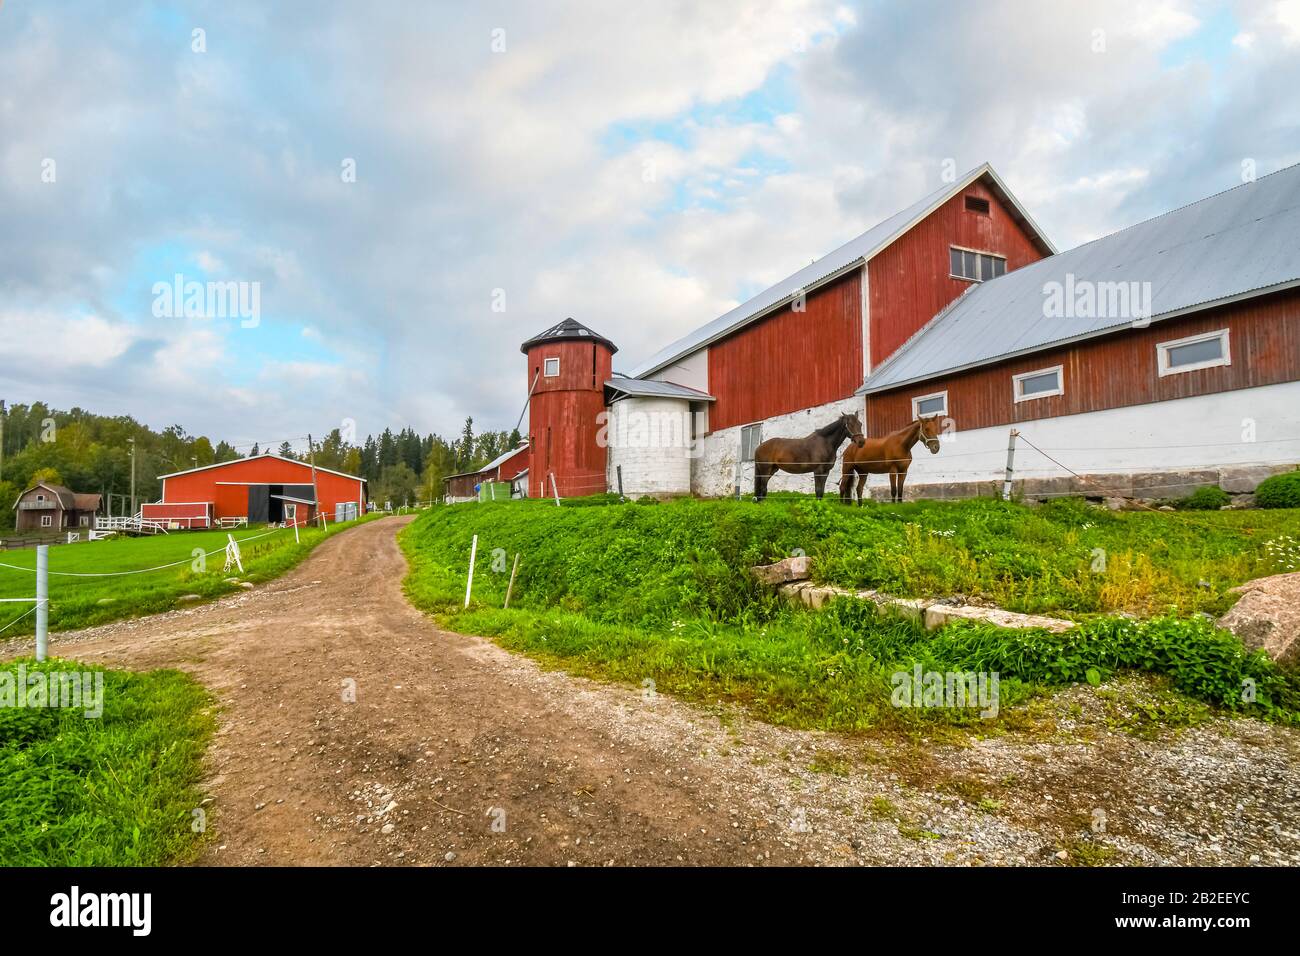 Two thoroughbred horses stand together in a corral at a large horse rance farm with barn and silo in the rural countryside of Finland. Stock Photo